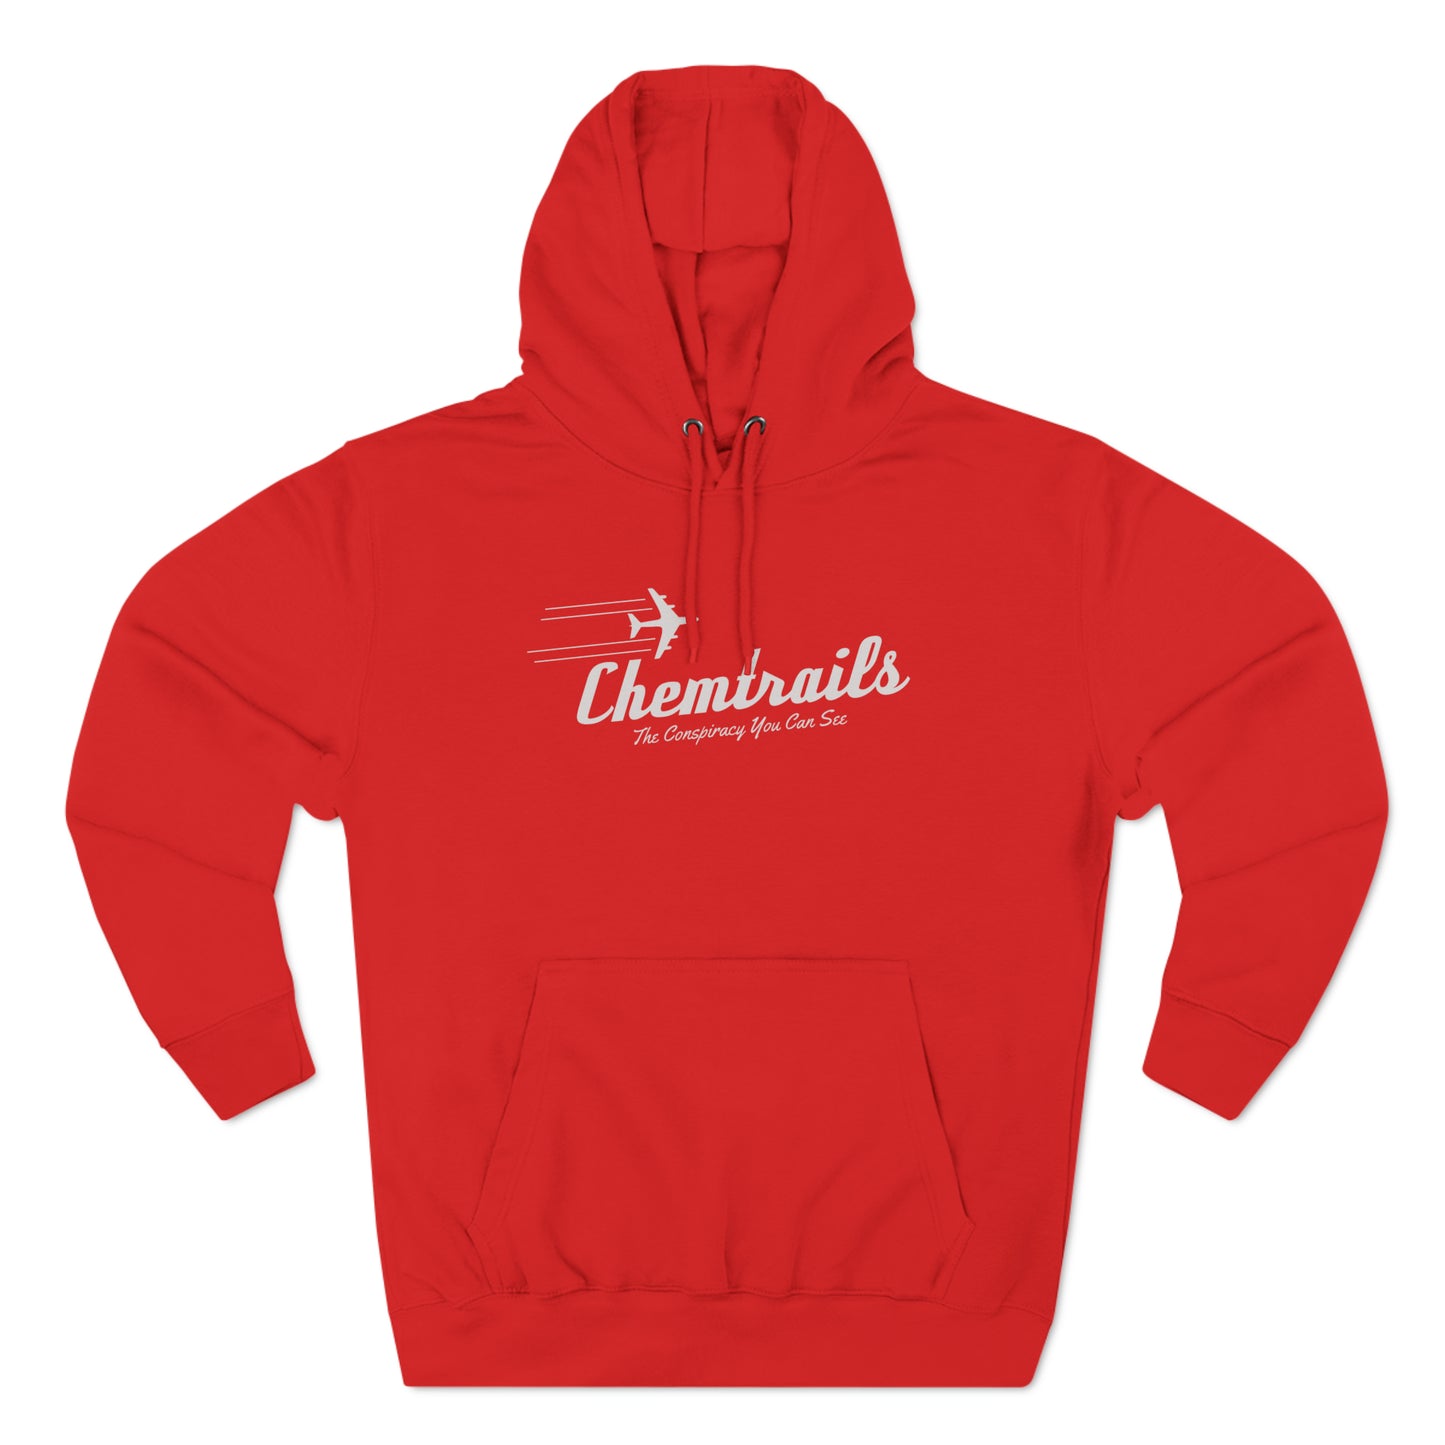 Chemtrails The Conspiracy You Can See Unisex Premium Pullover Hoodie